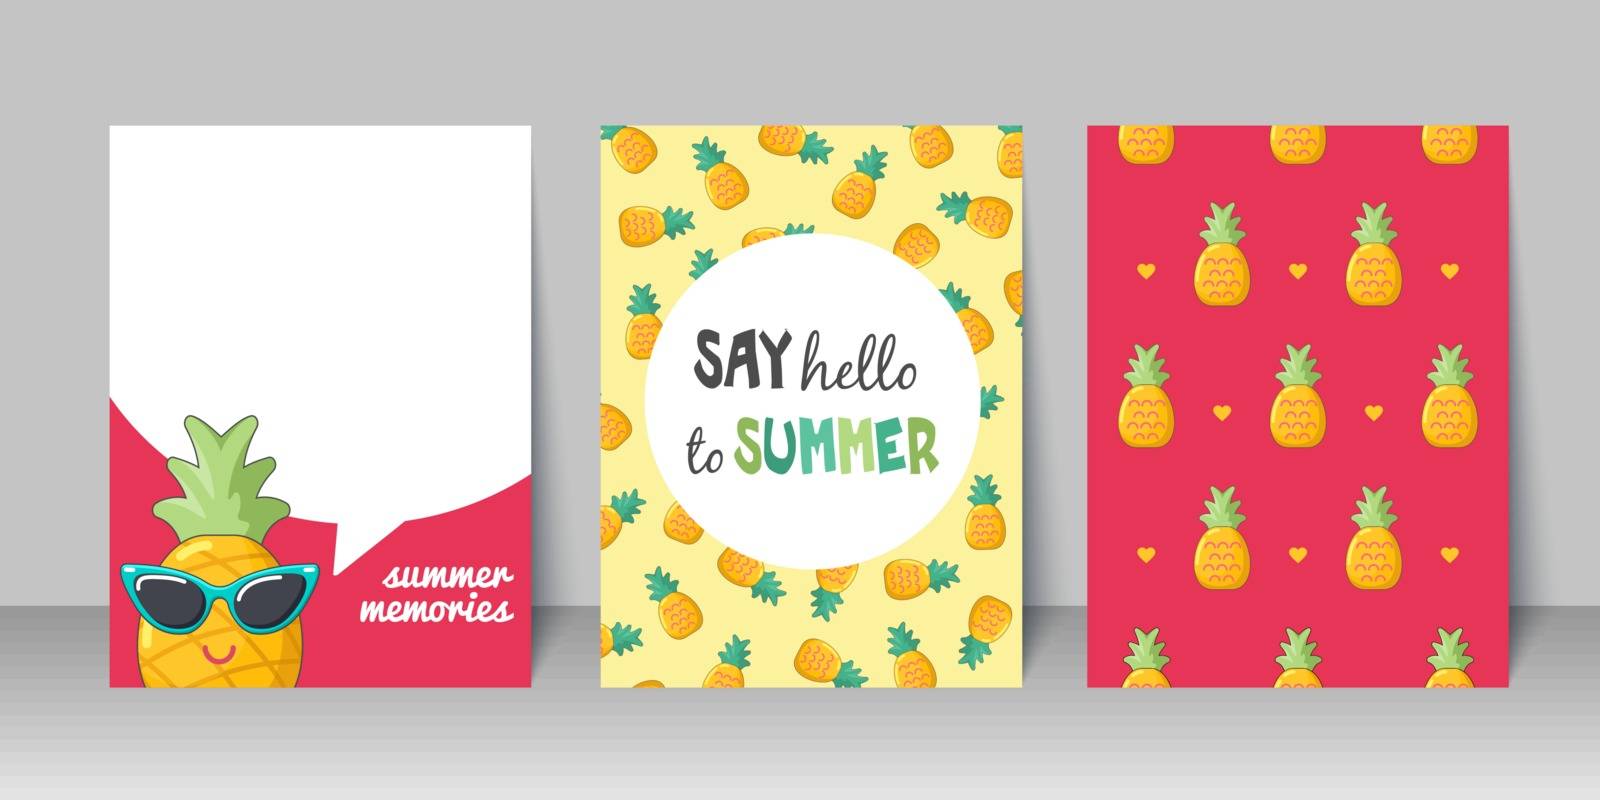 Summer flyer card. Say hello to summer. Journal cards. Vector illustrations for t-shirt, poster prints. Holiday, travel, vacation theme